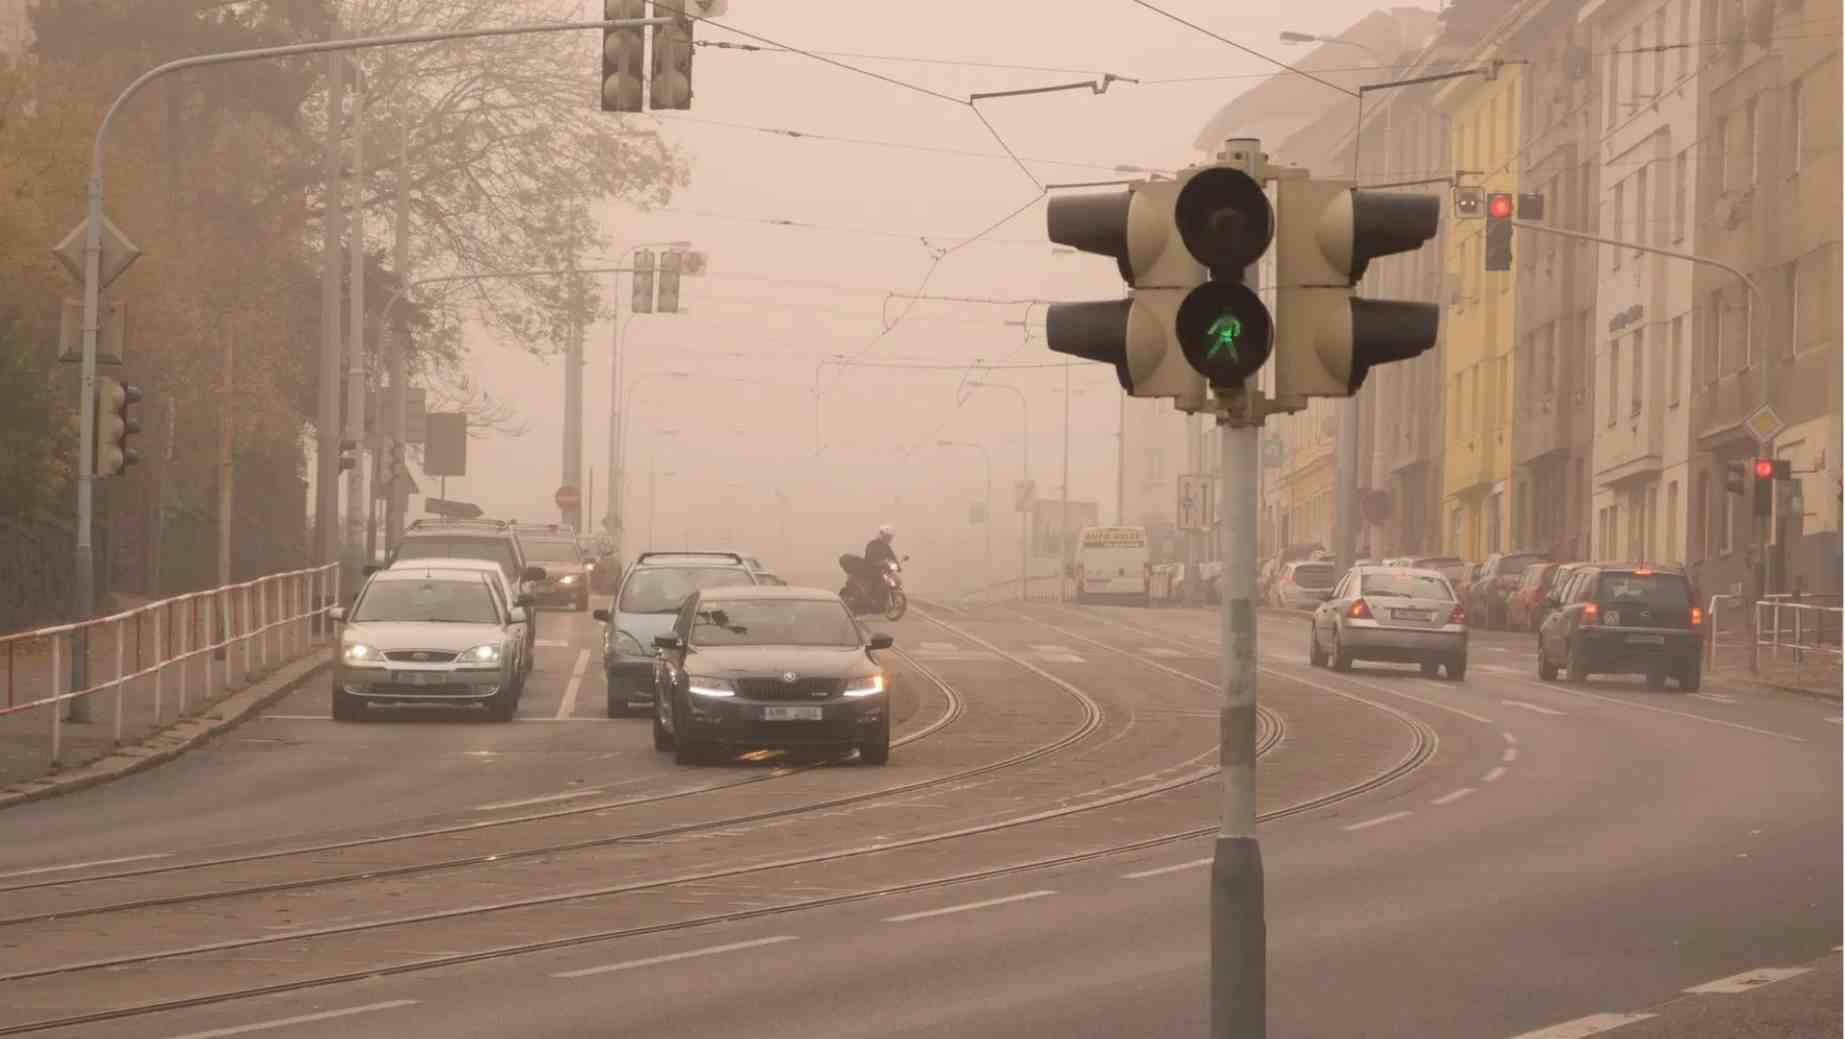 Sand From Sahara Causes Smog Over Most of the Czech Republic